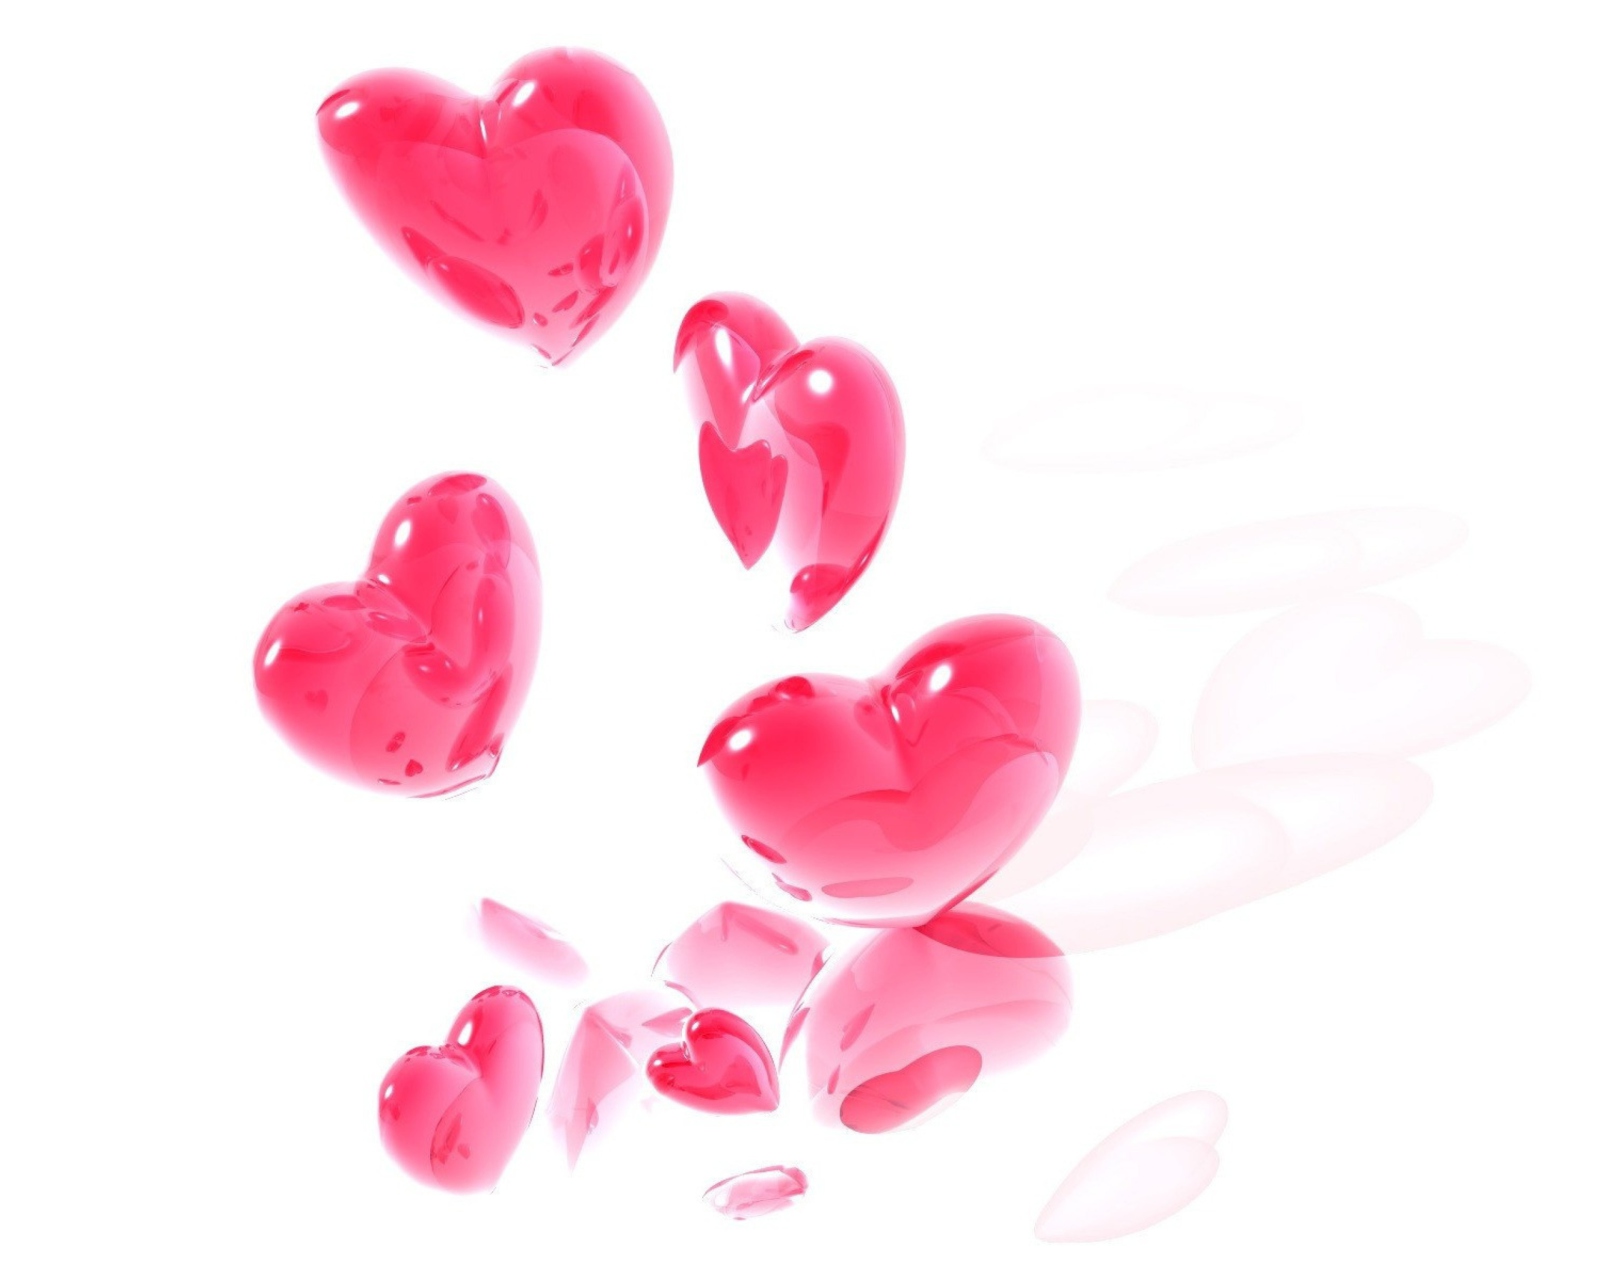 Abstract Pink Hearts On White screenshot #1 1600x1280